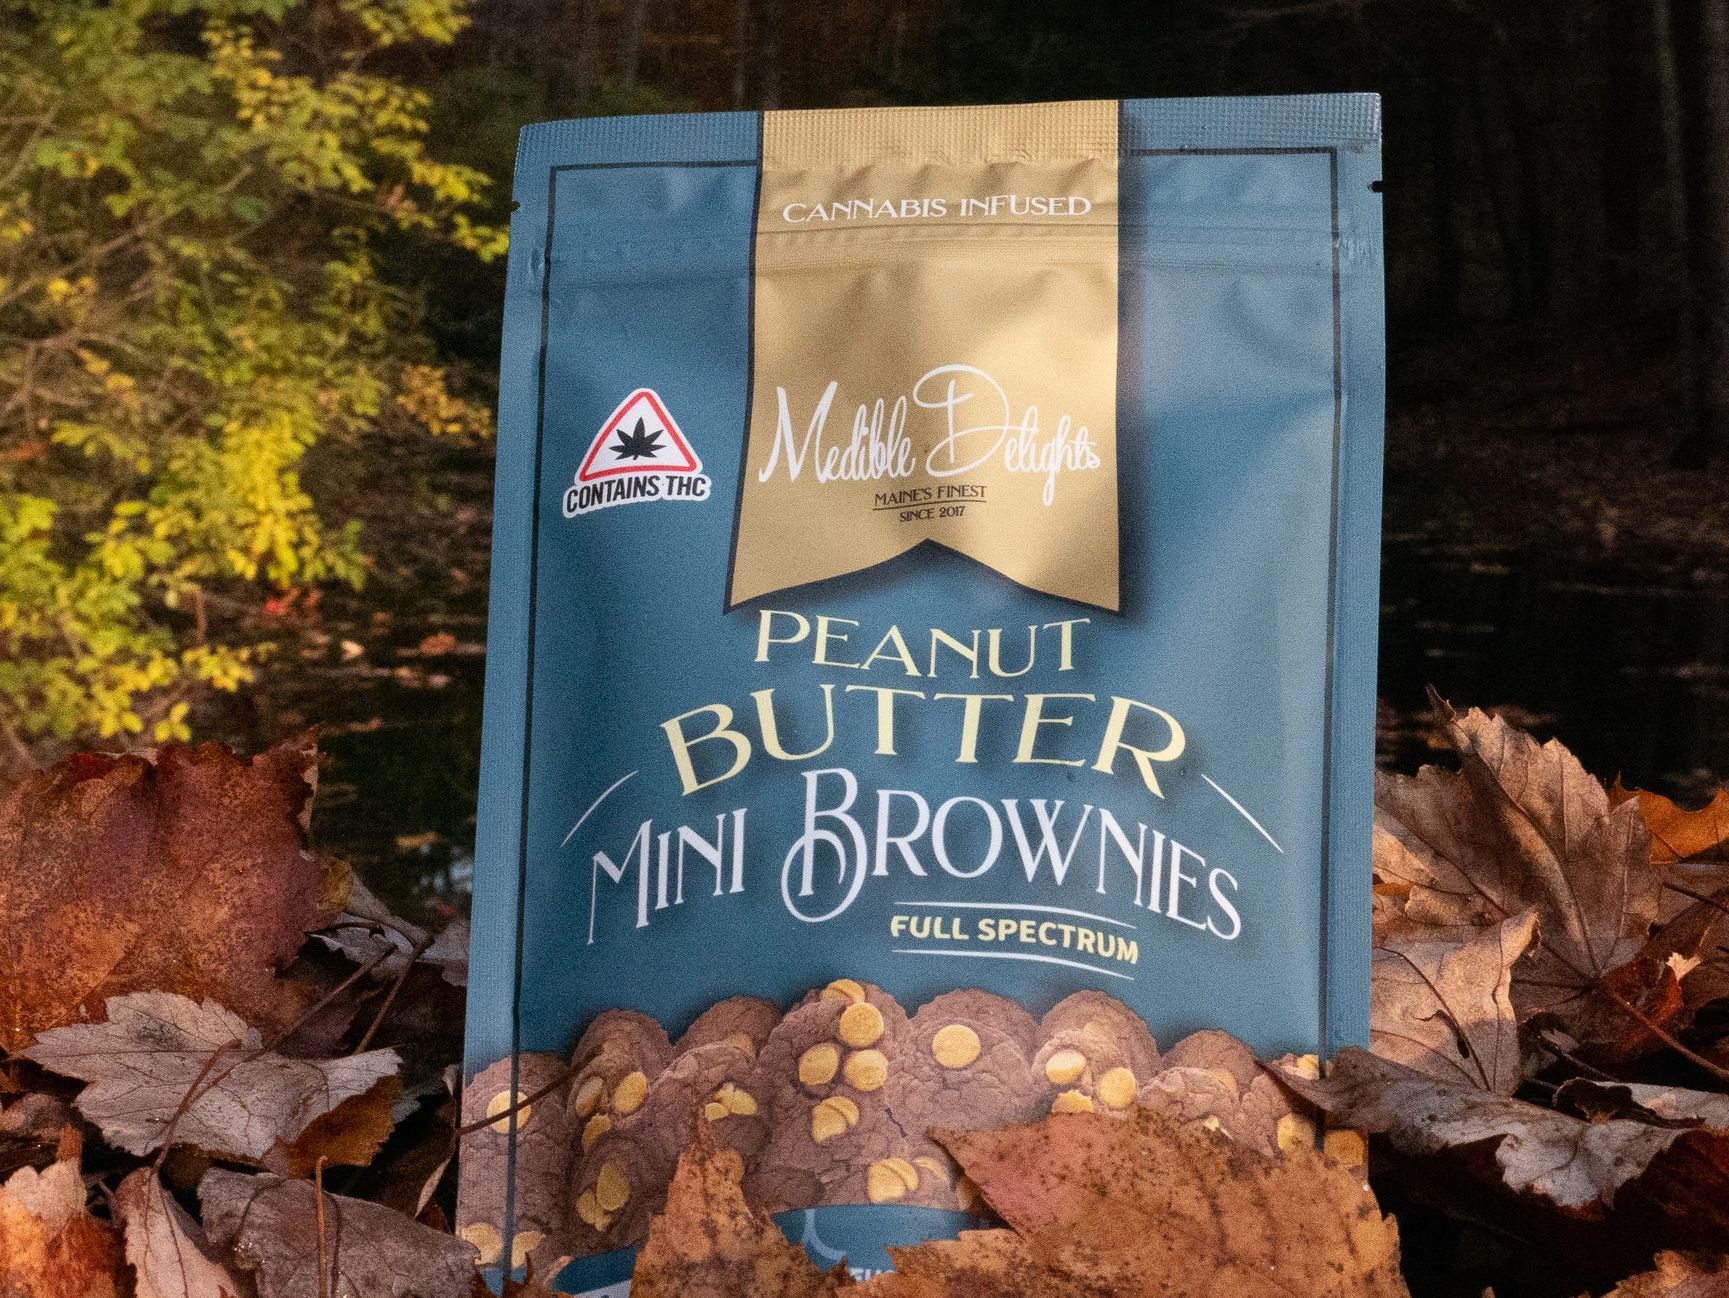 MEDIBLE DELIGHTS
MINI PEANUT BUTTER BROWNIES
100MG thc : 10 PACK